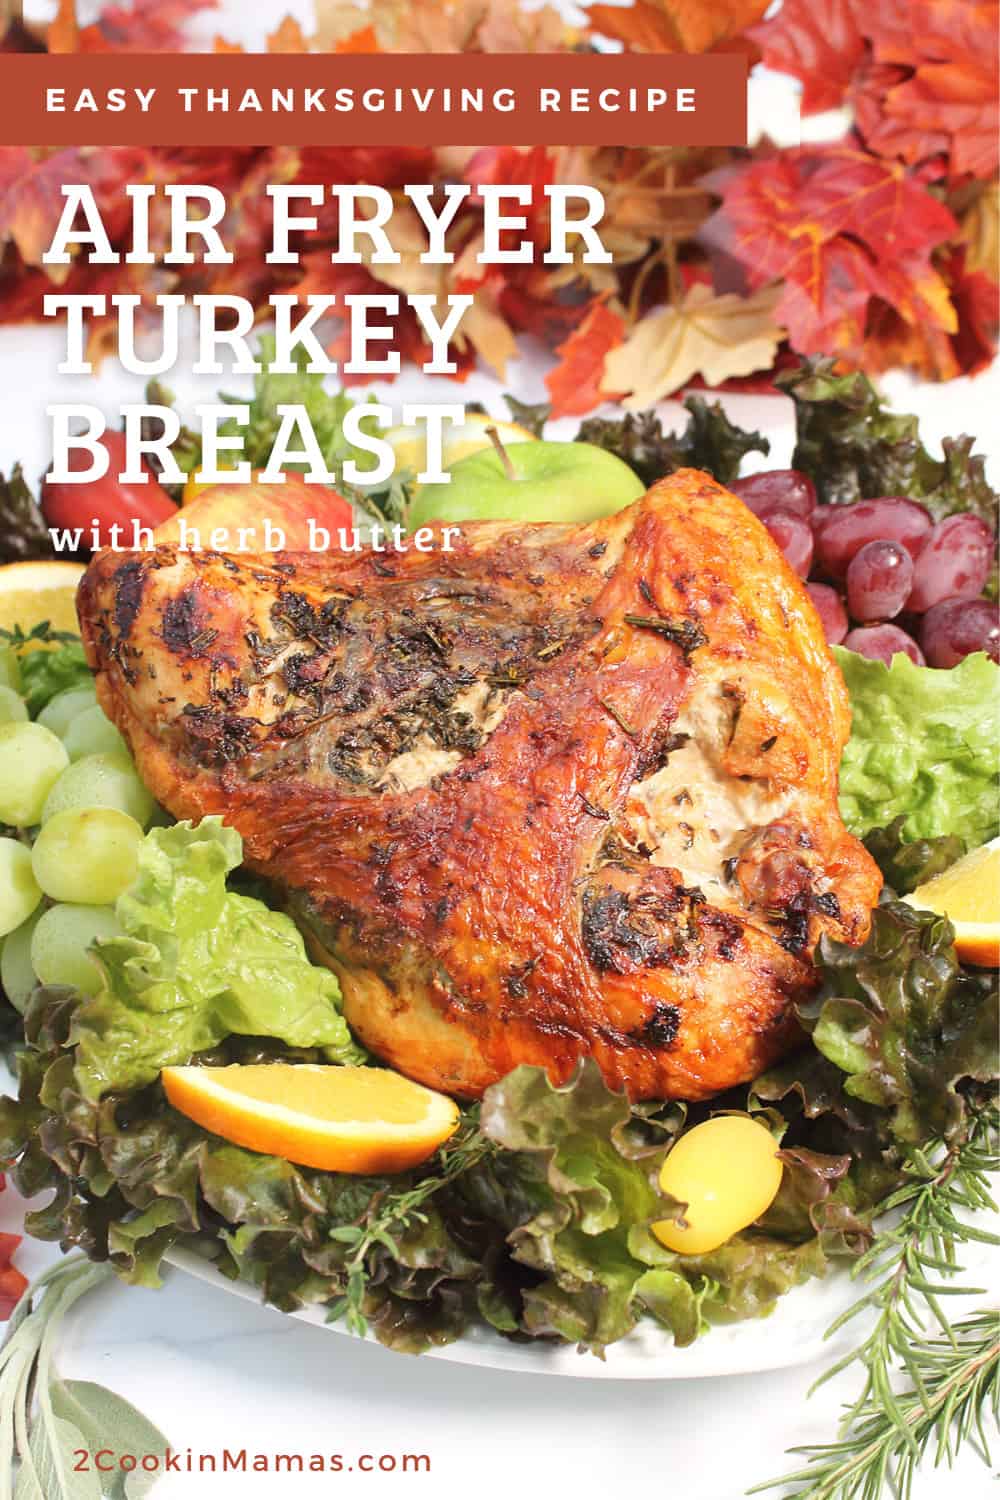 Air Fryer Turkey Breast with Herb Butter